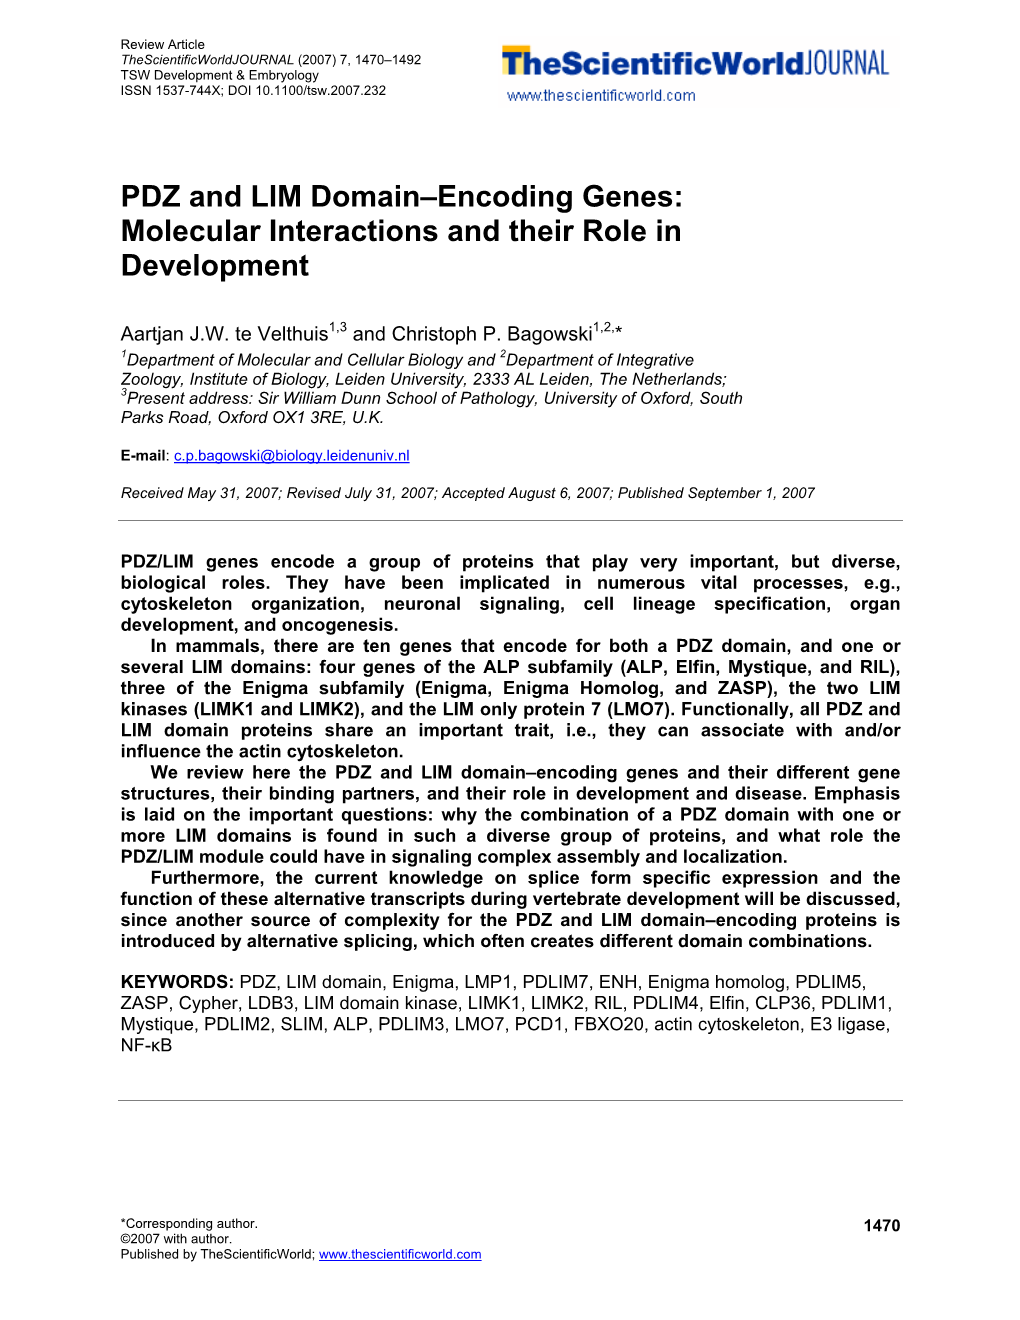 PDZ and LIM Domain–Encoding Genes: Molecular Interactions and Their Role in Development